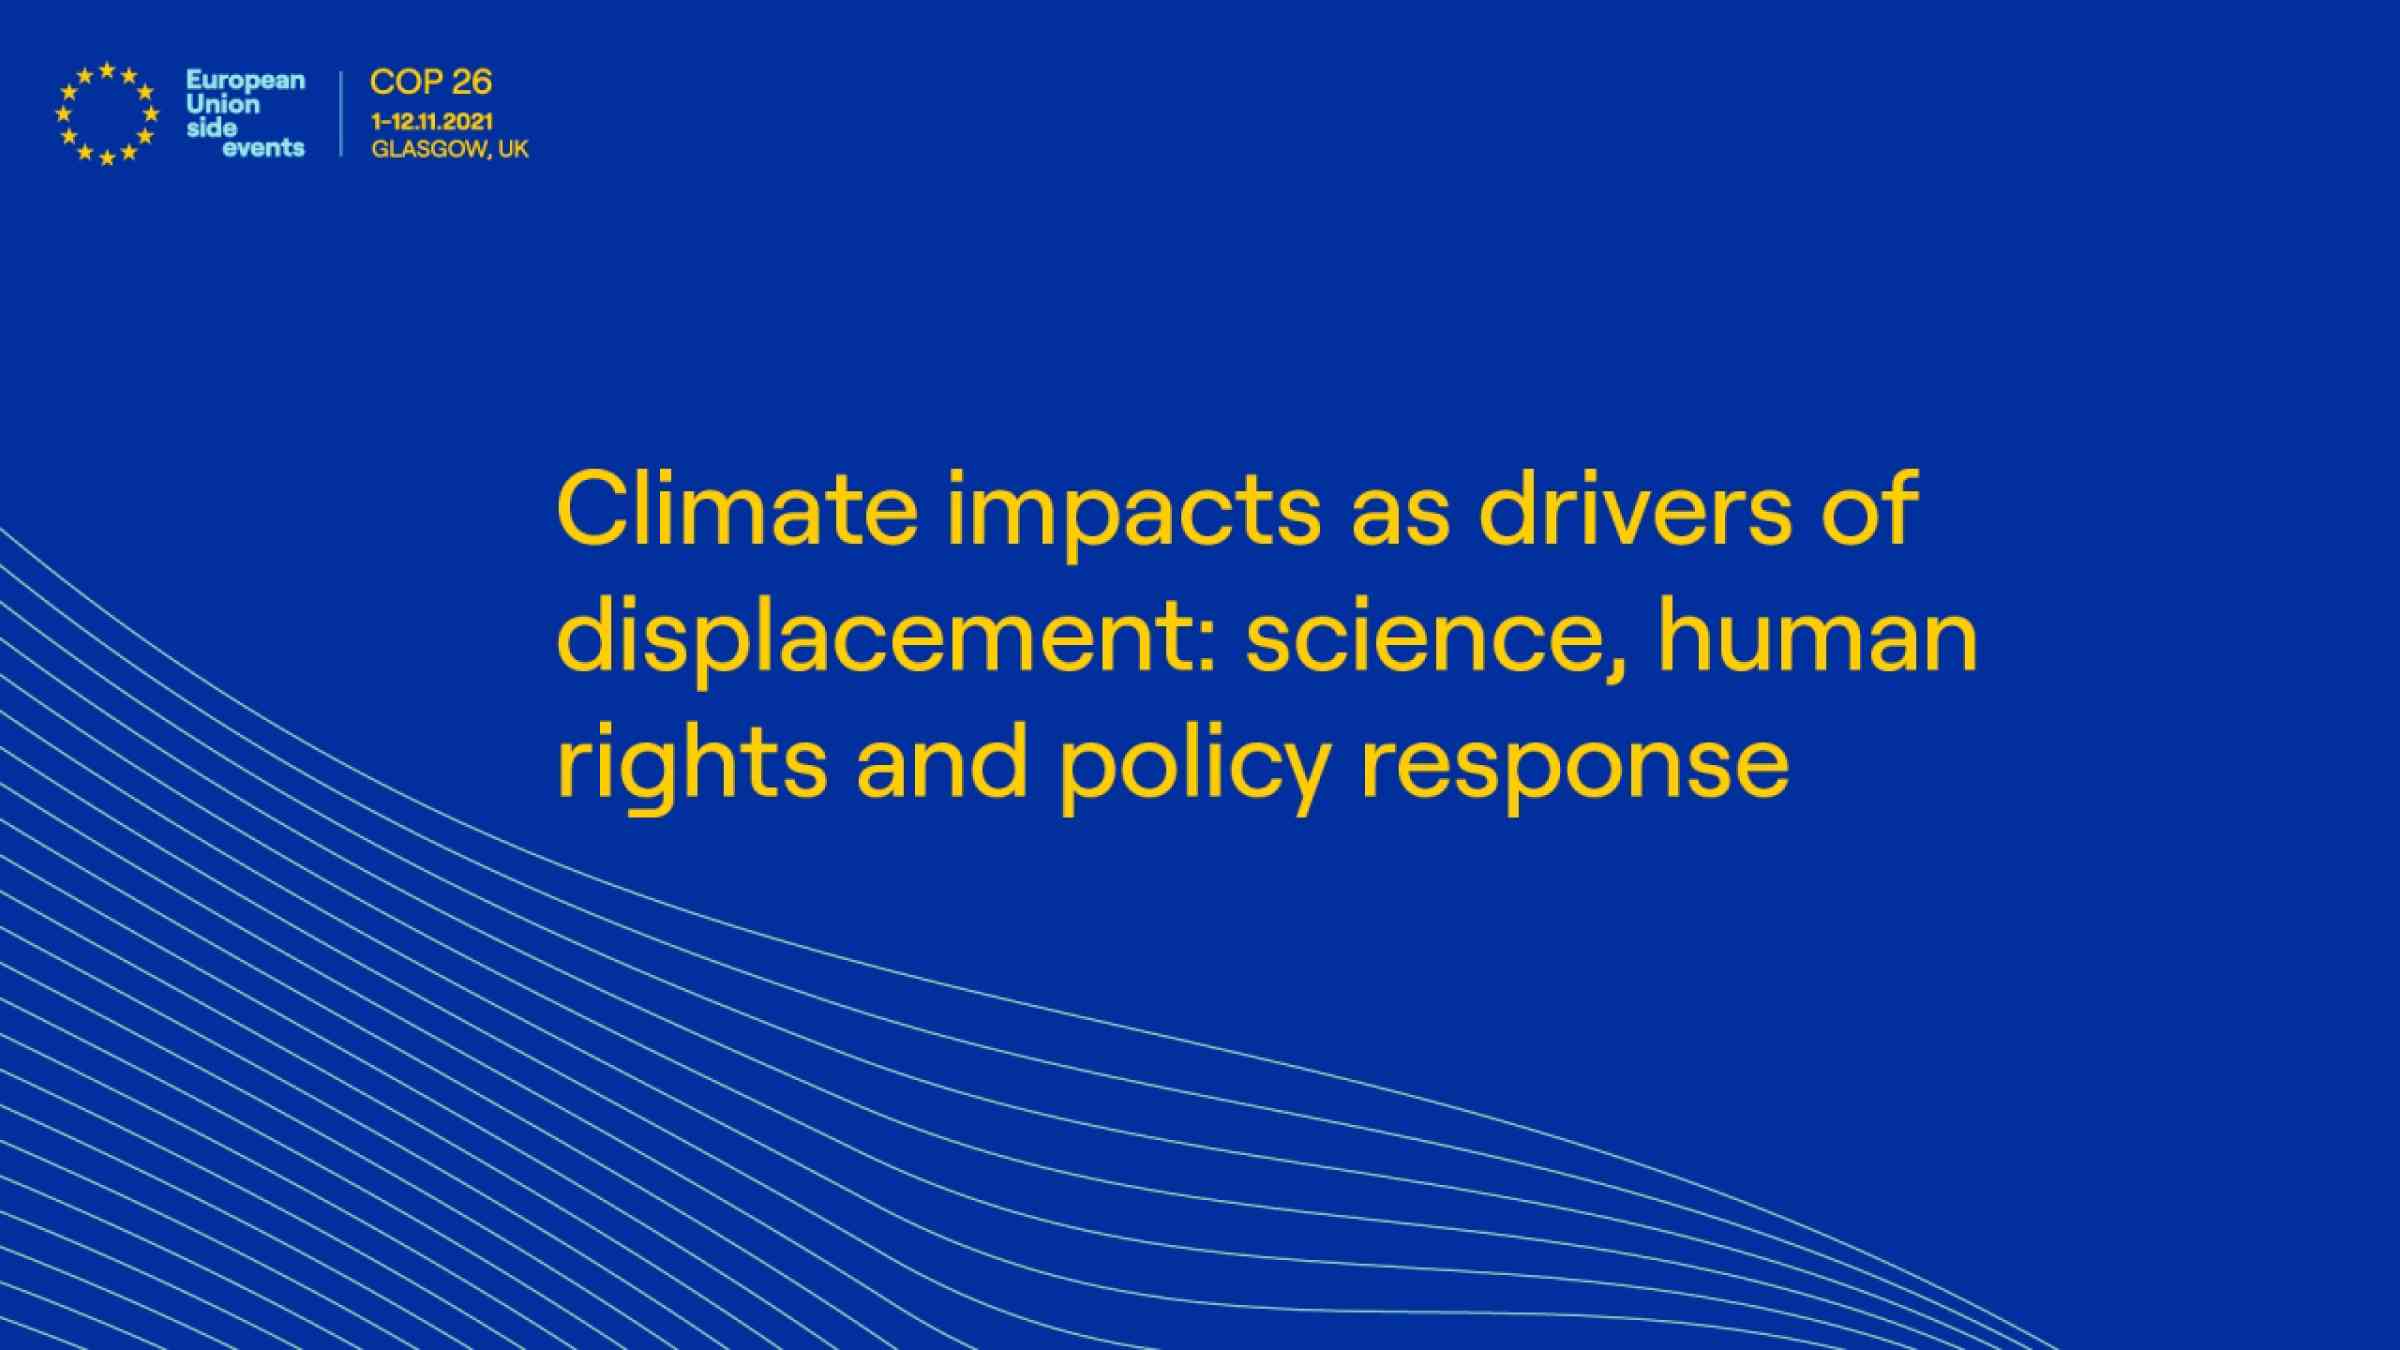 Banner of the climate impacts as drivers of displacement side event